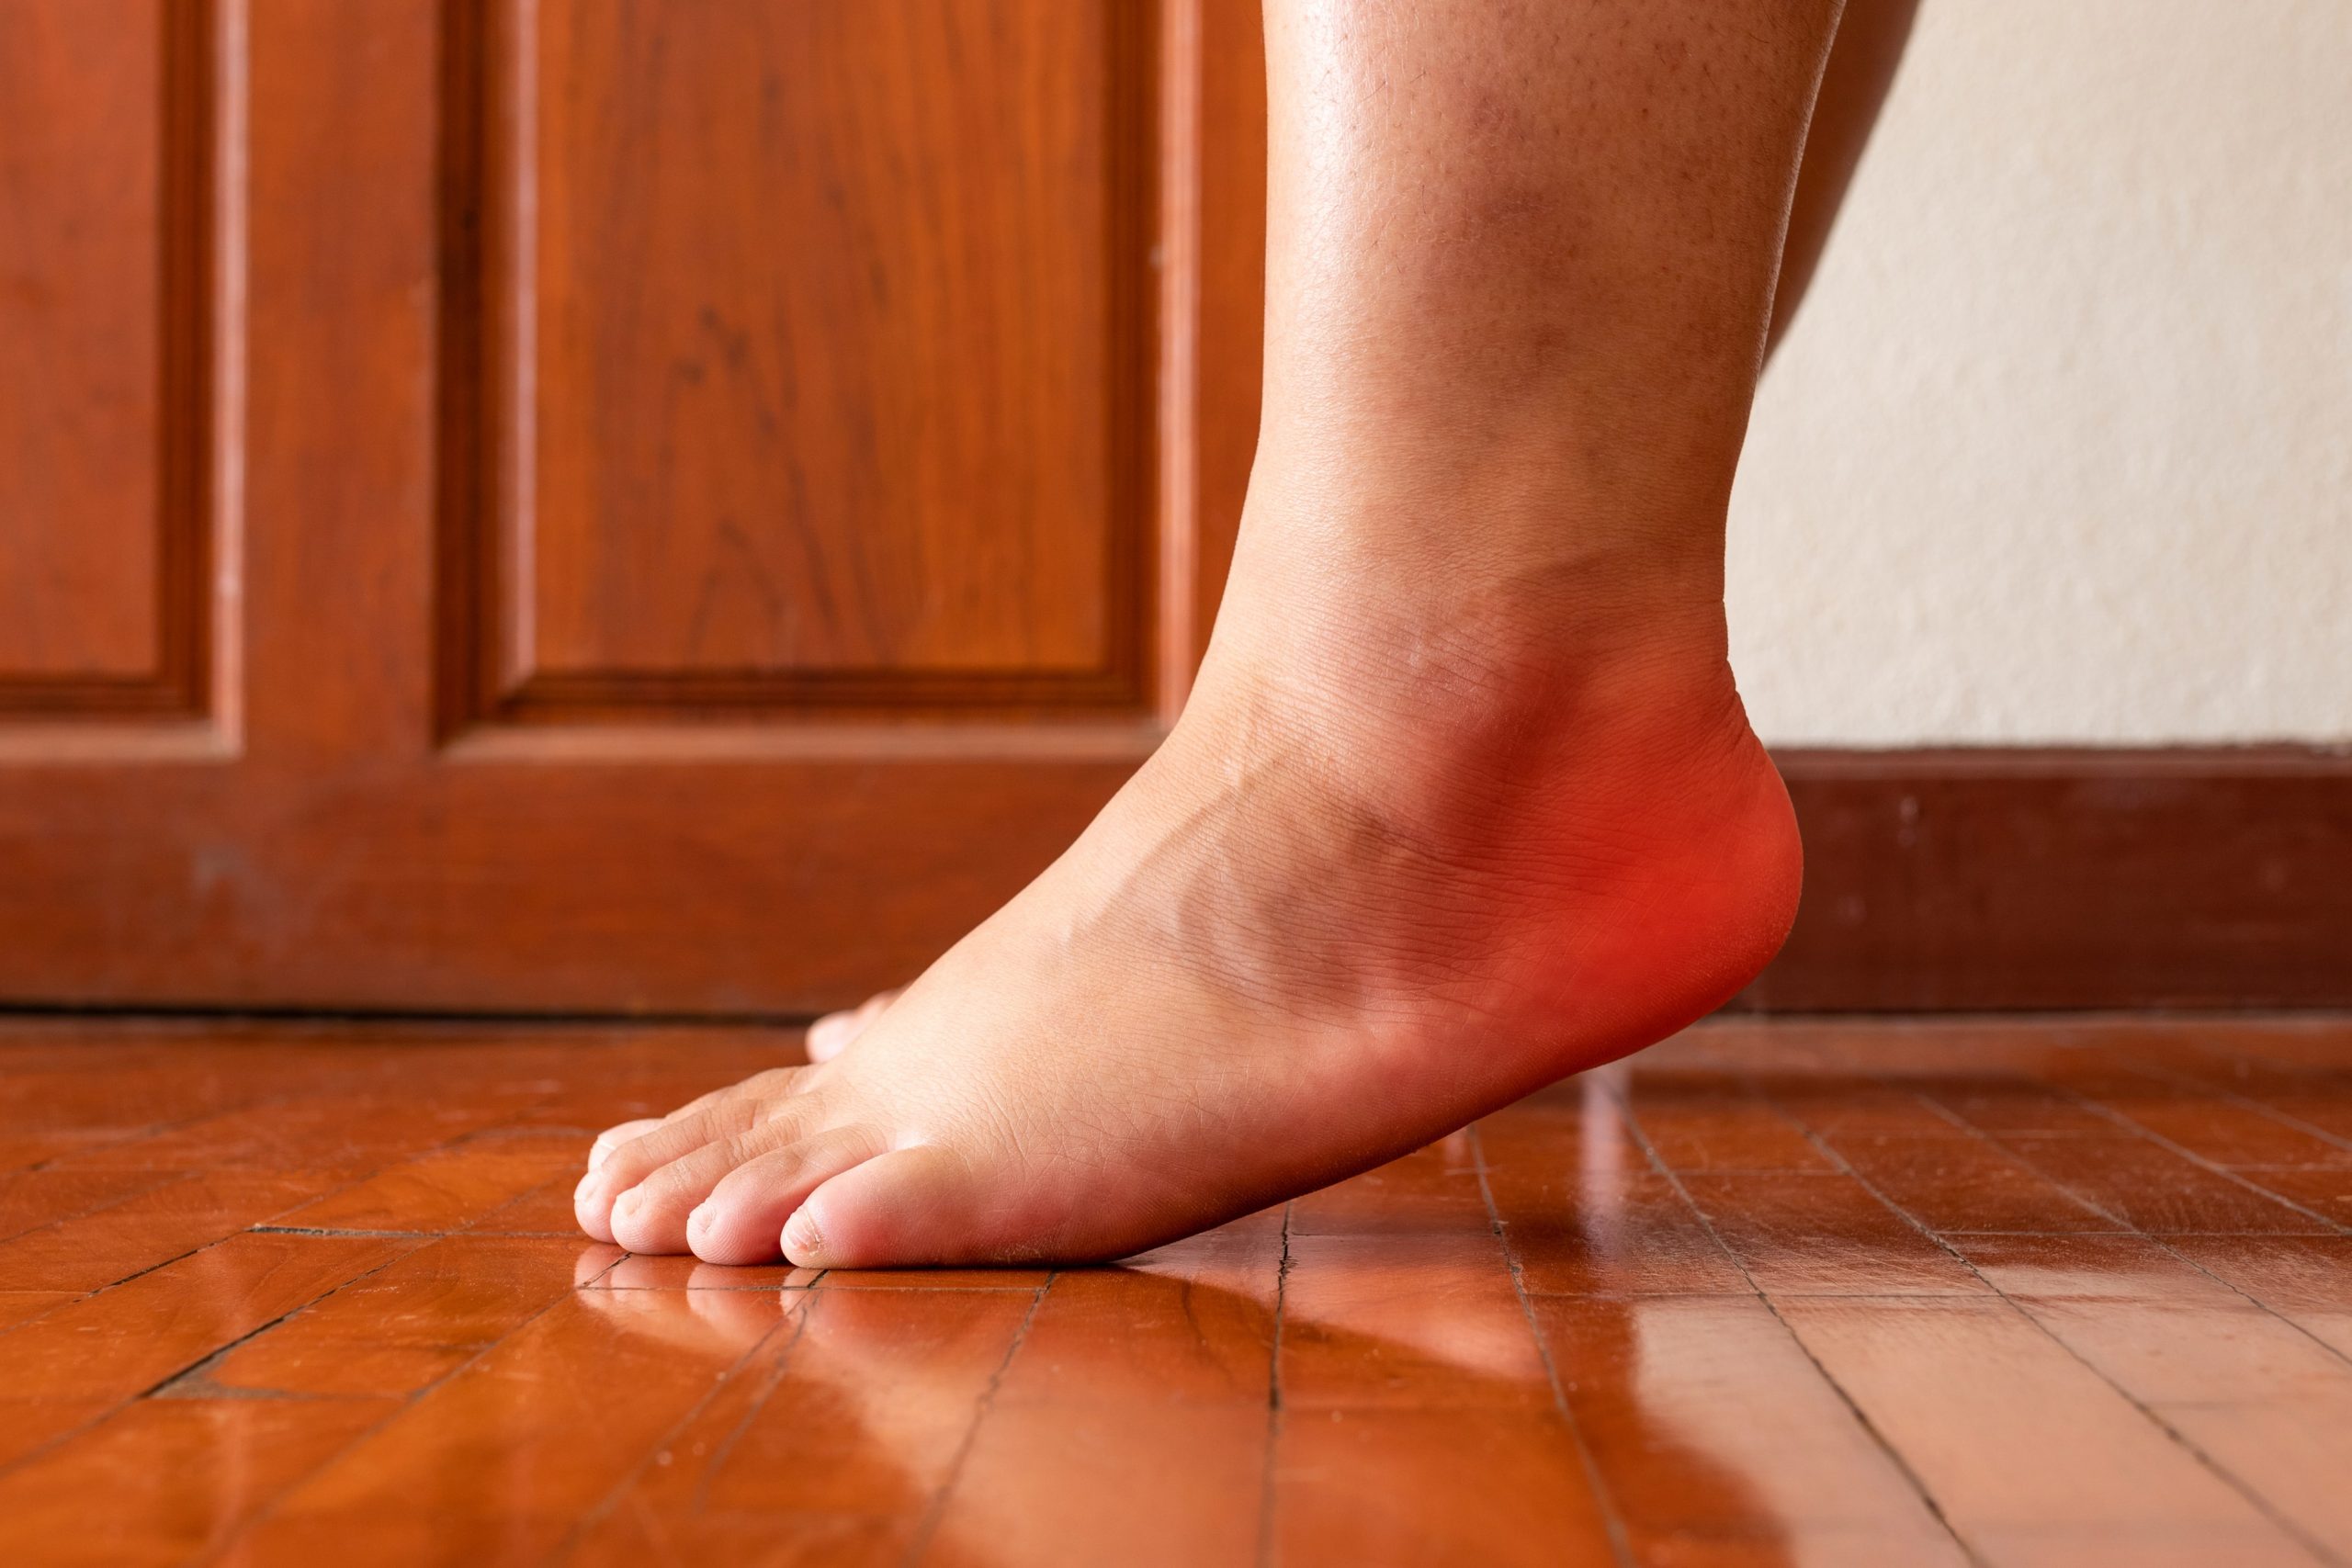 remedies for planters fasciitis